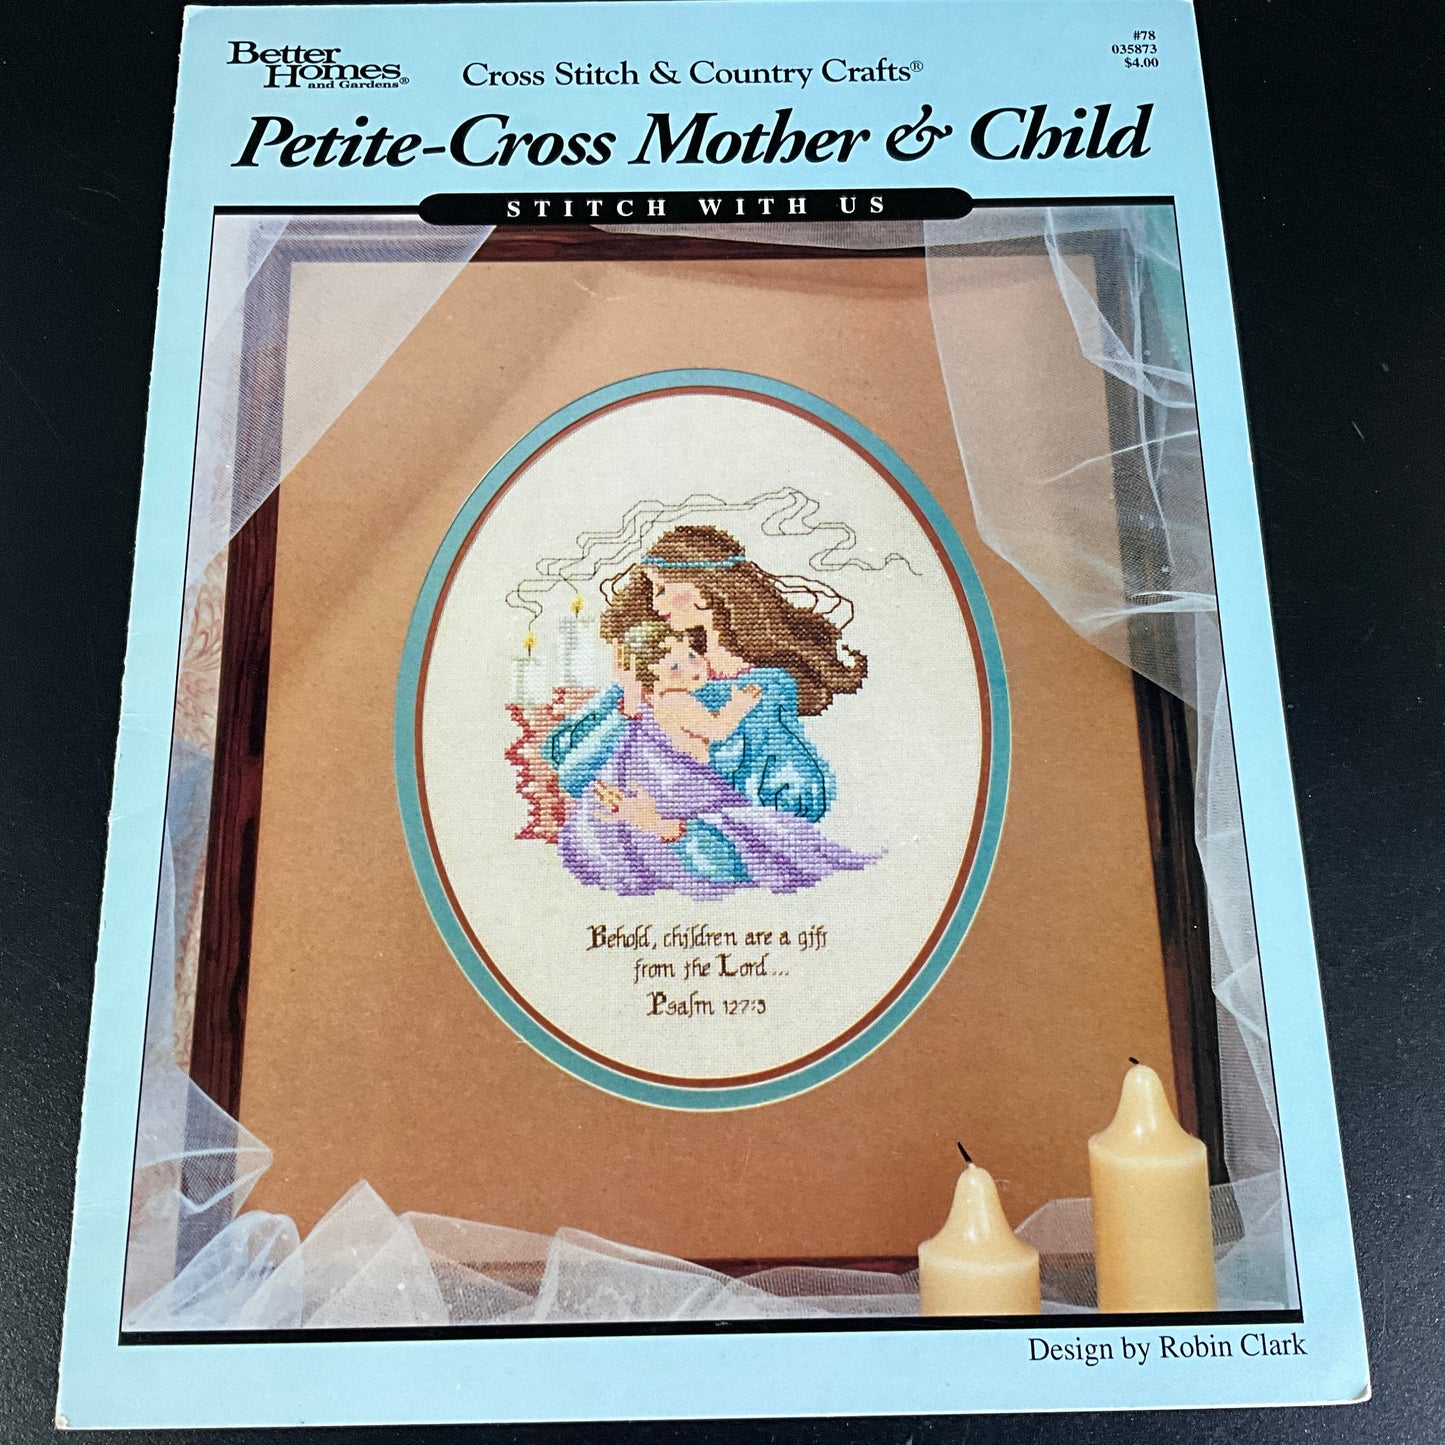 Better Homes and Gardens Cross Stitch & Country Crafts choice Counted Cross Stitch Patterns see pictures and variations*